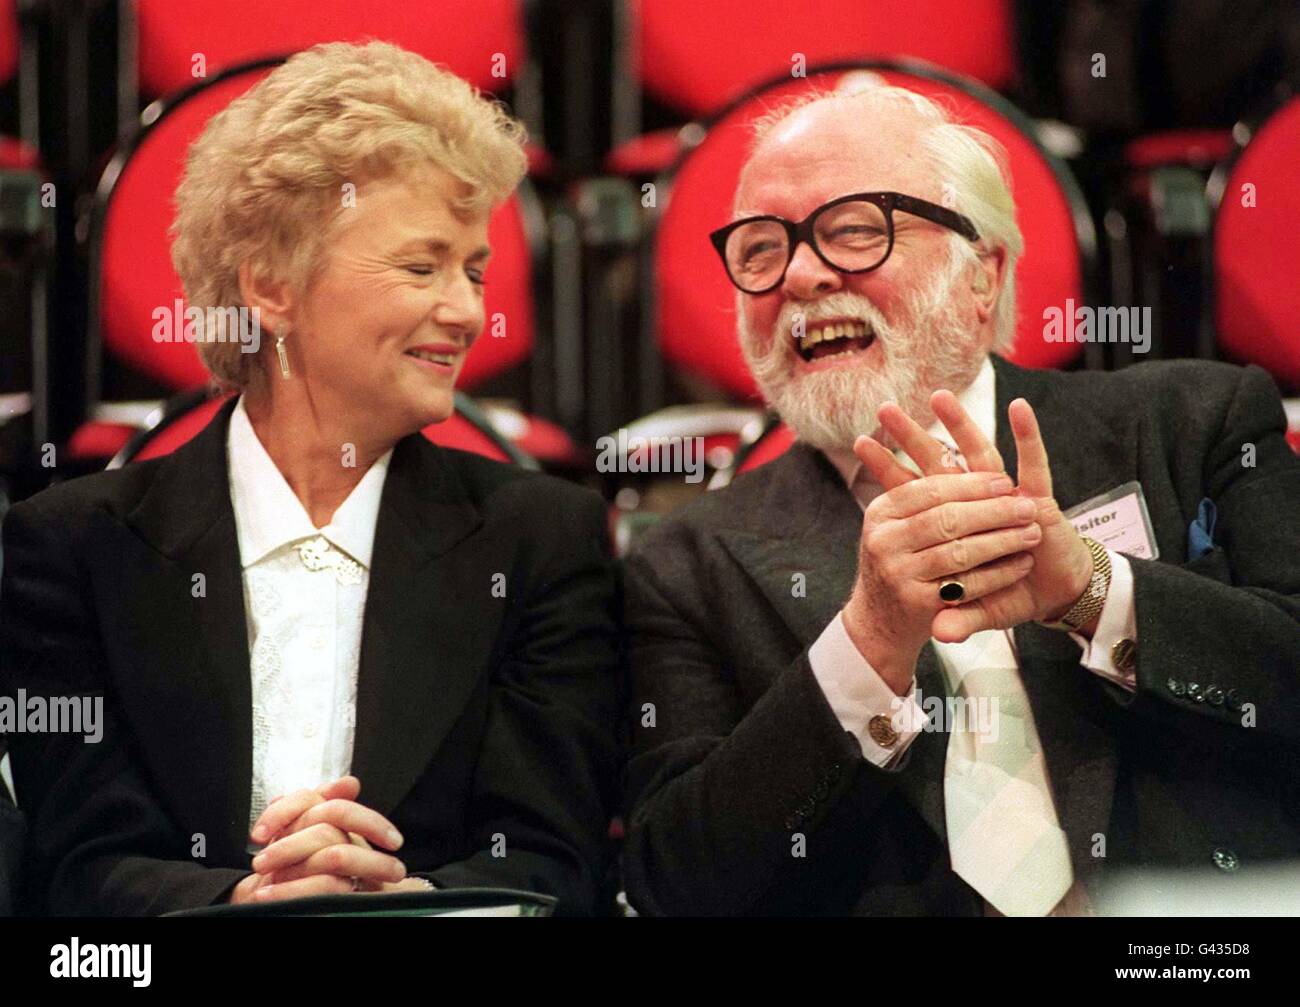 Labour MEP Glenys Kinnock talks with actor/director Sir Richard Attenborough at the party conference in Brighton today (Thursday). Stock Photo